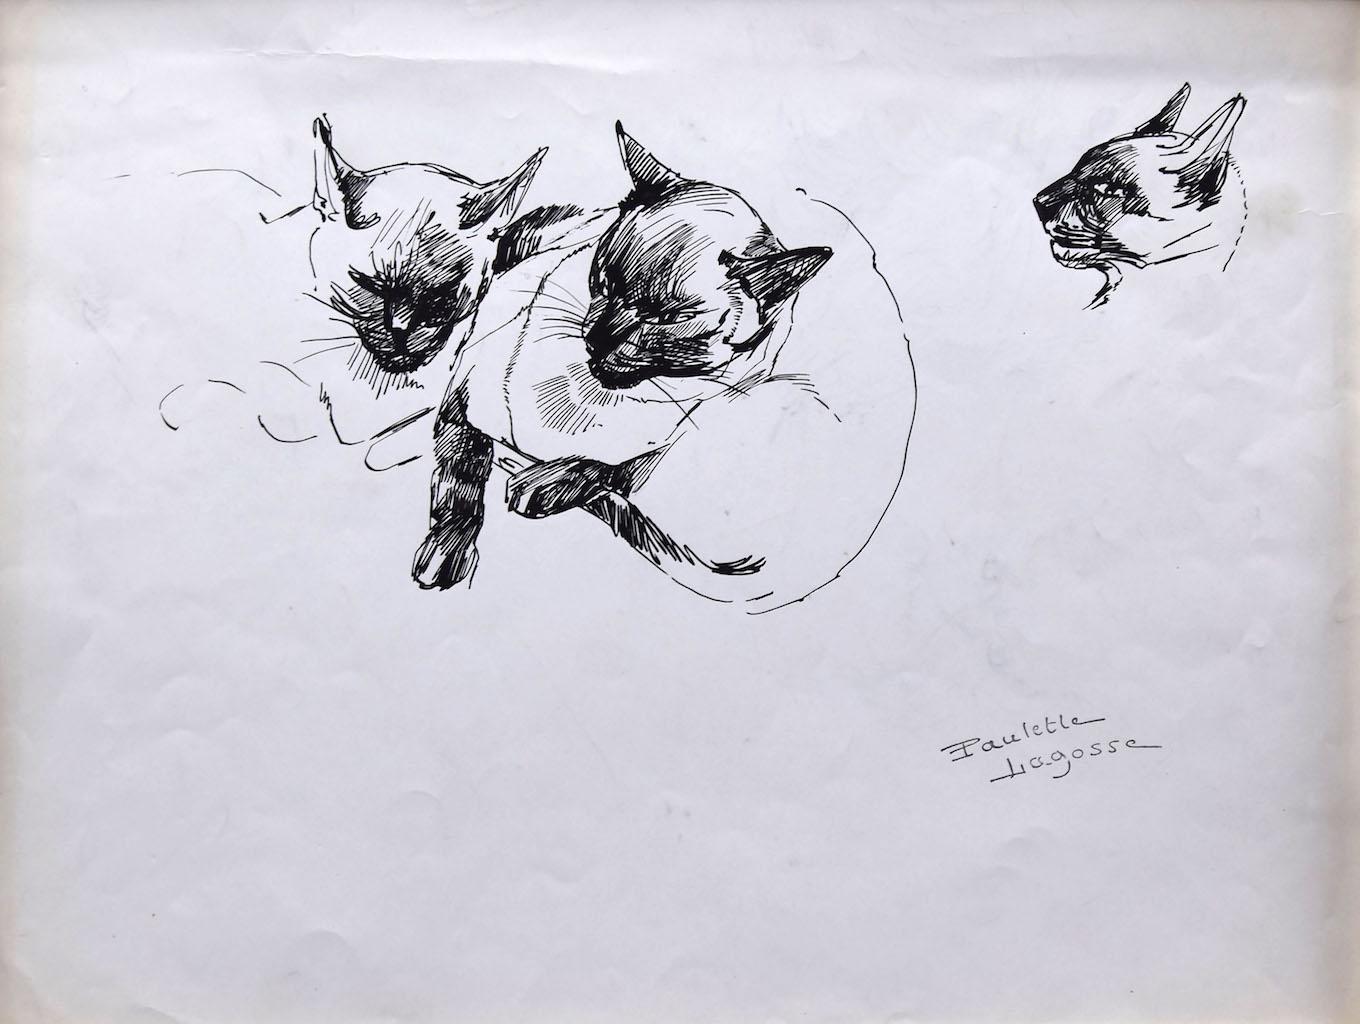 The Cats - Pen on Paper by Marie Paulette Lagosse - 1970s